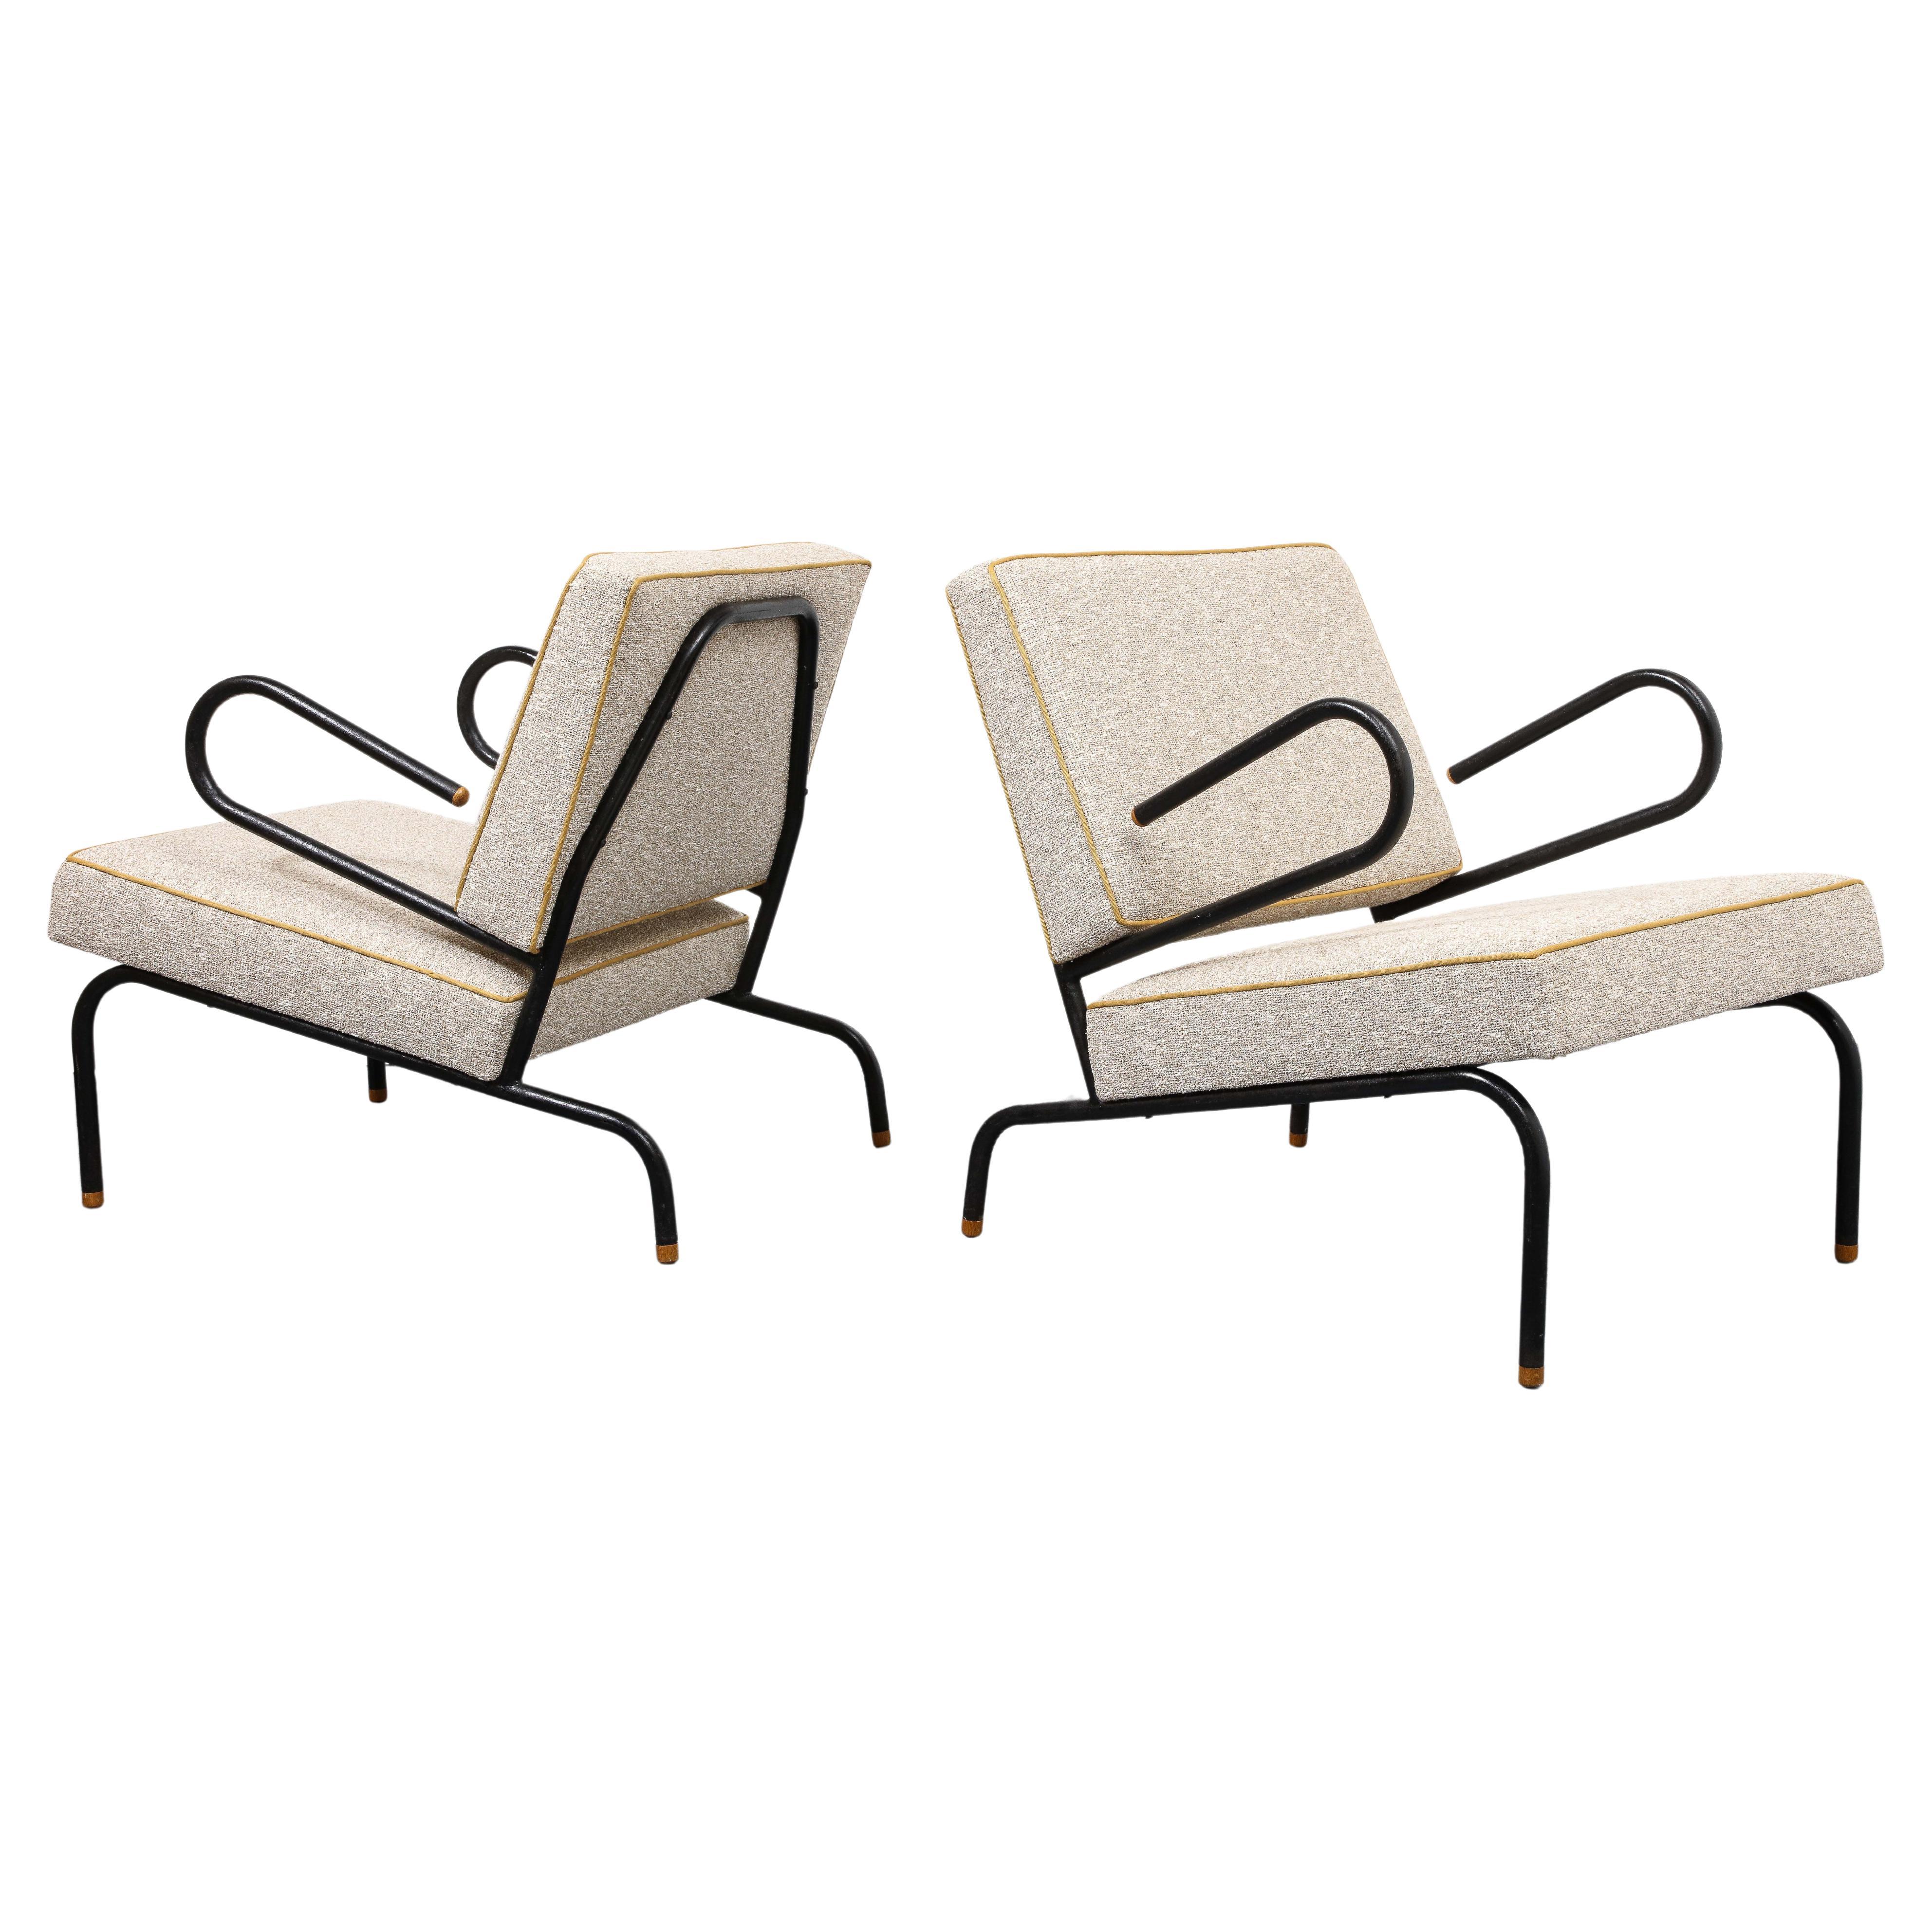 Bent Steel Lounge Chair by Jacques Hitier for Tubauto, France, c. 1955 For Sale